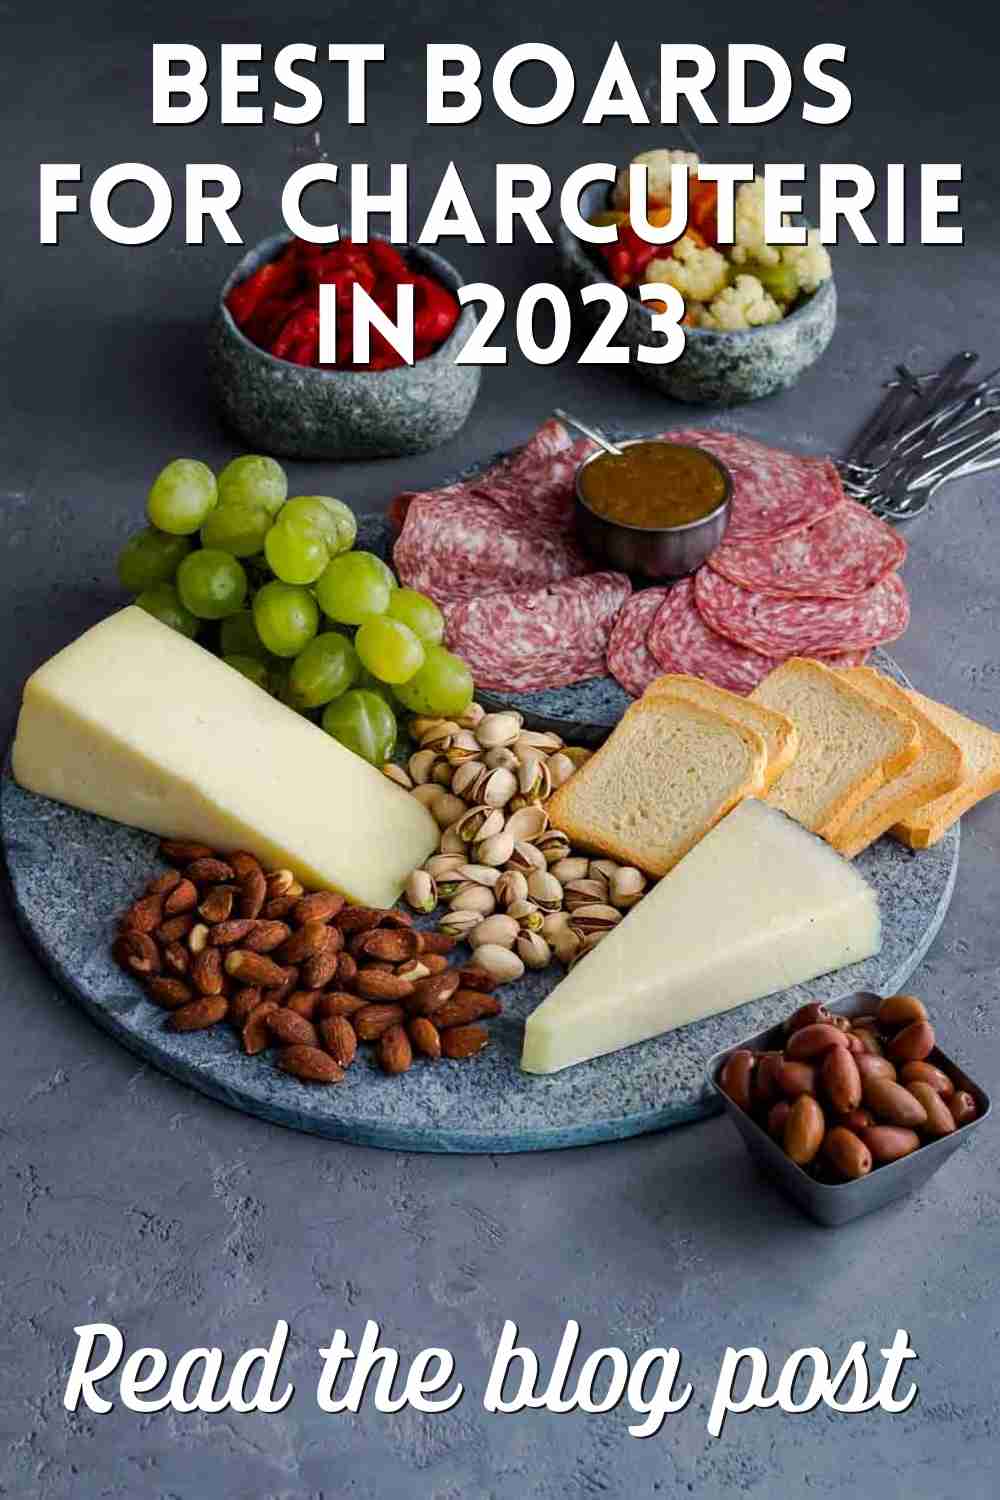 The Best Boards for Charcuterie in 2023